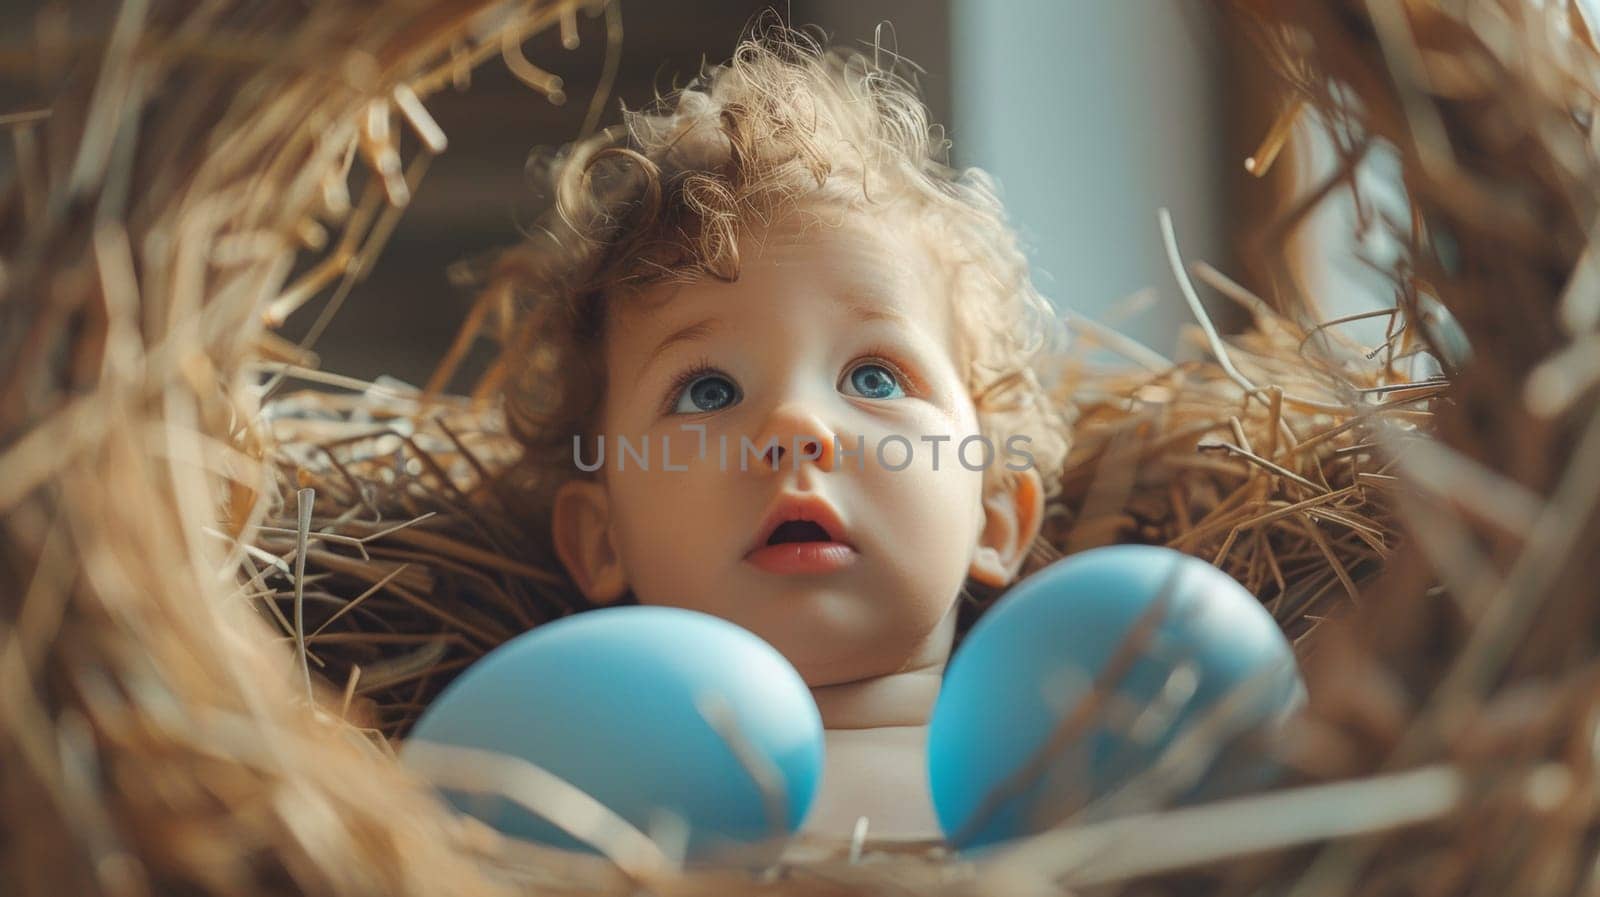 A baby in a nest with blue eggs and some hay